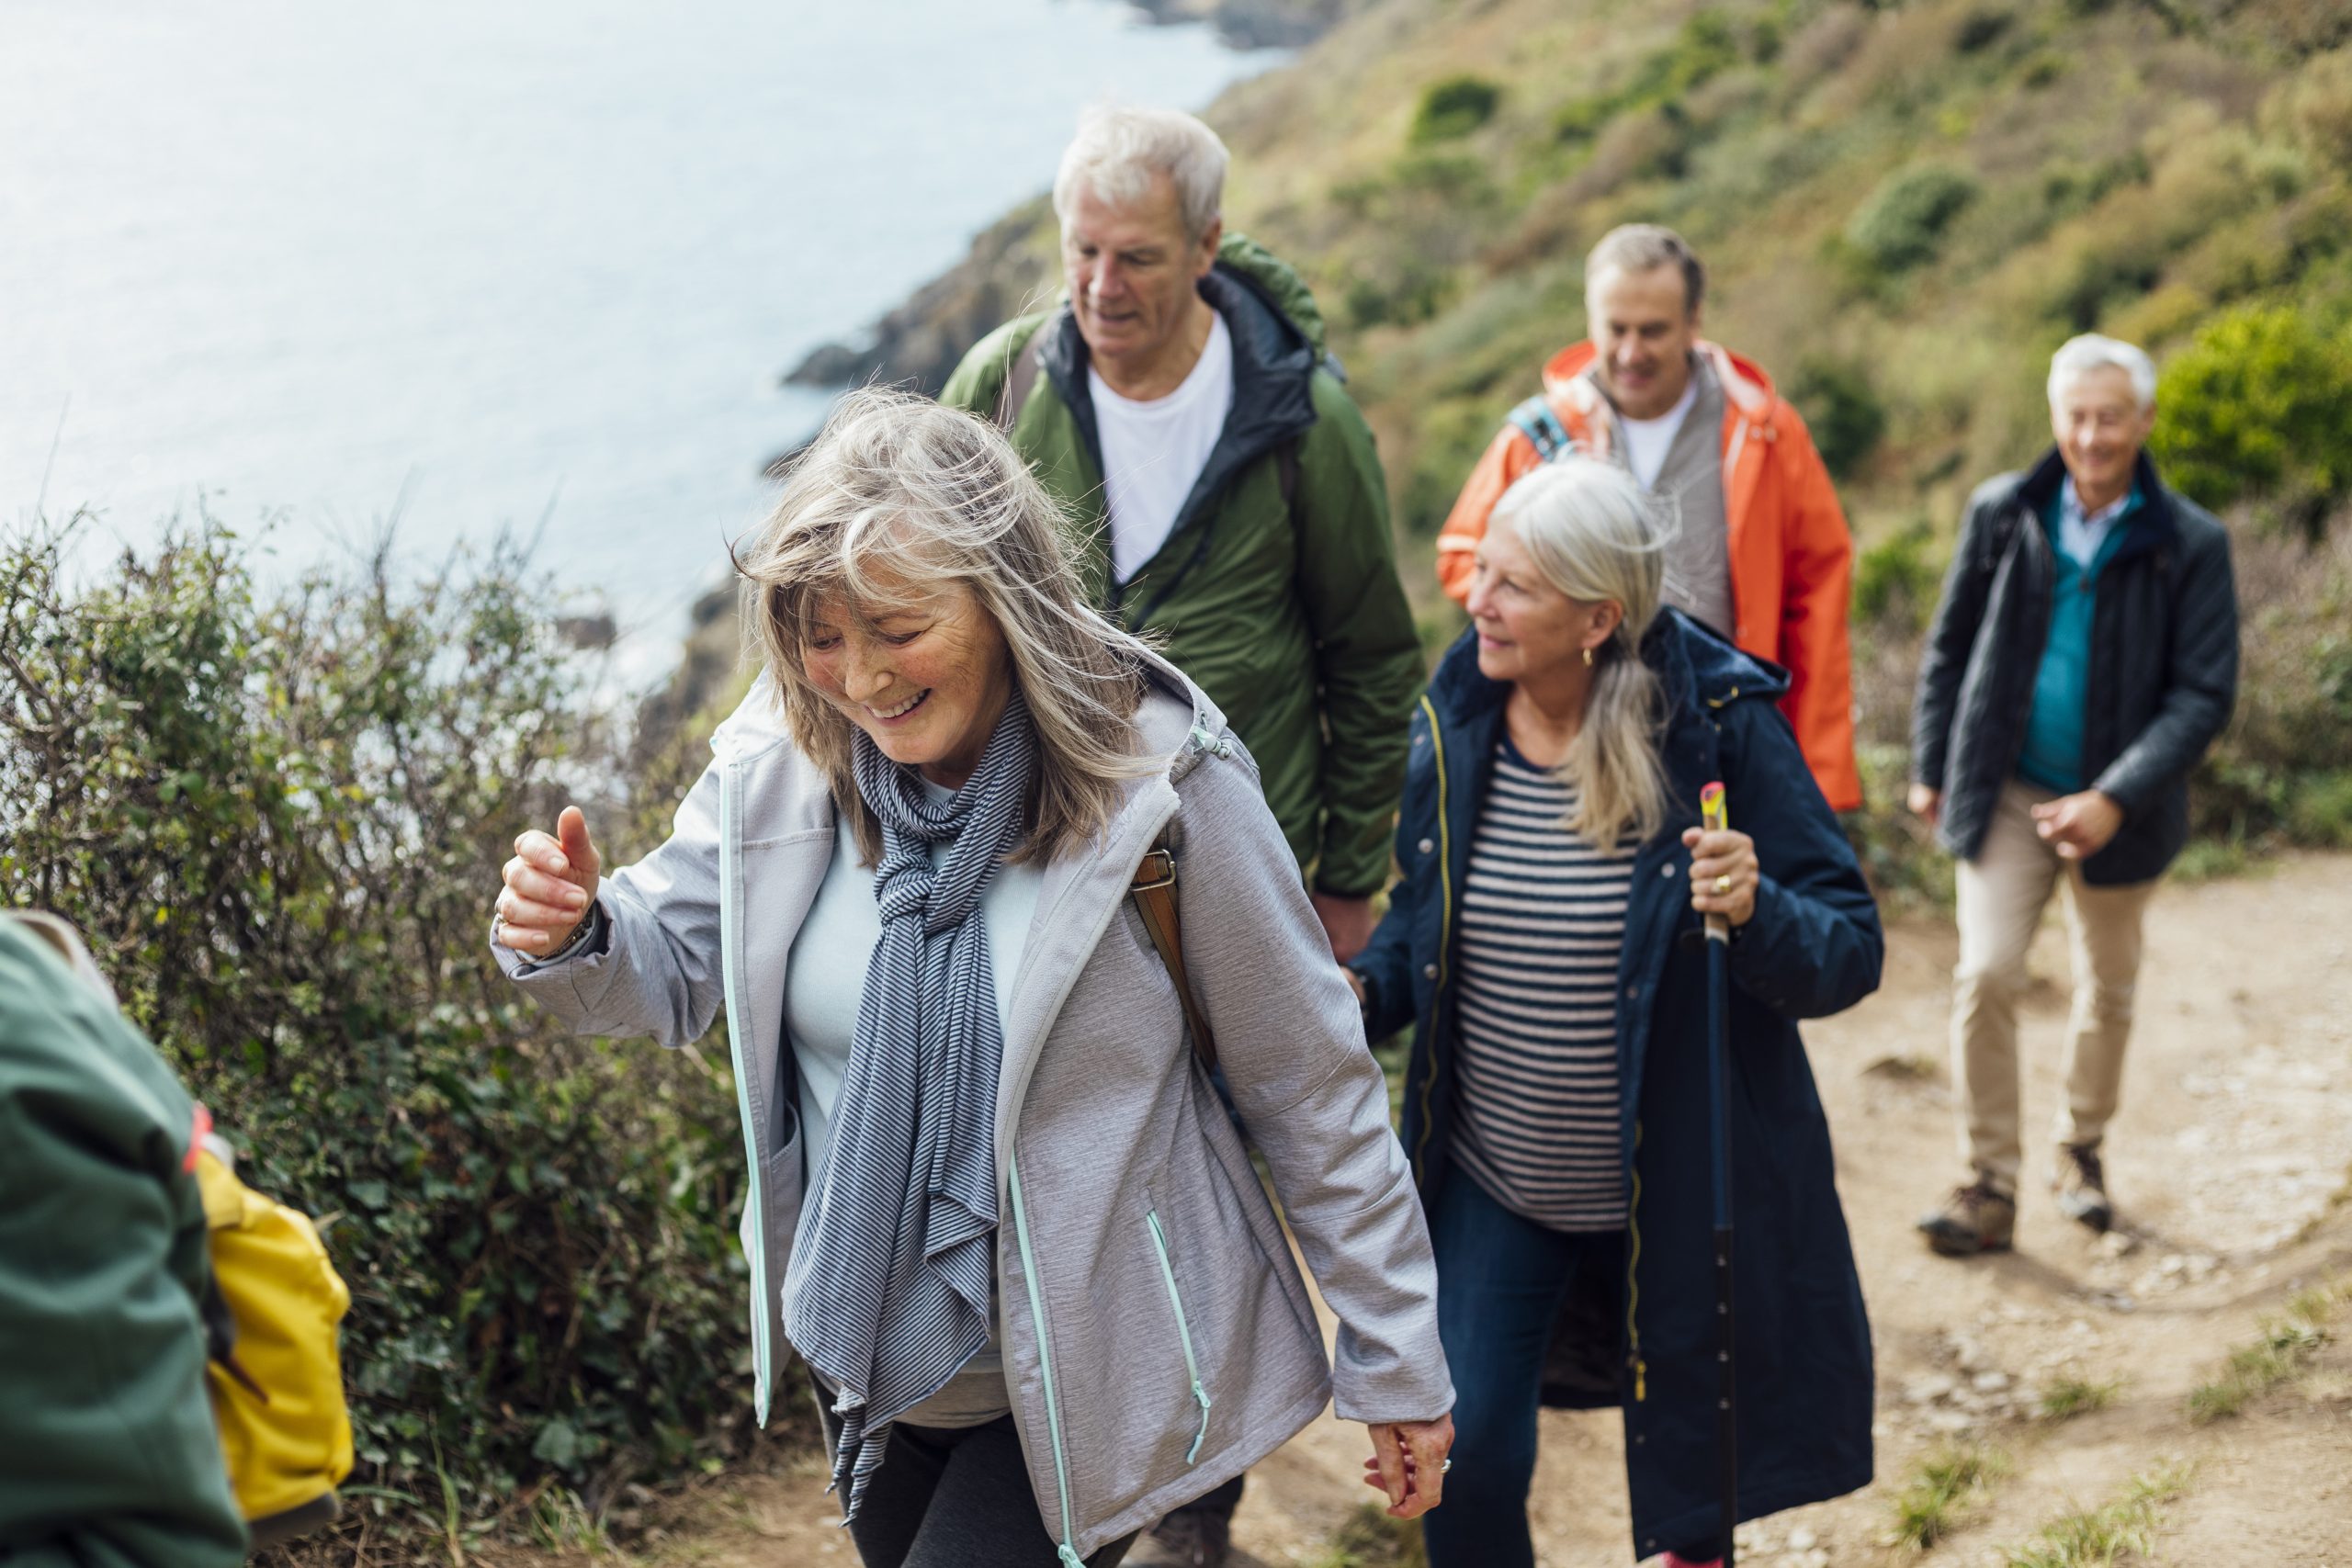 A group of elderly individuals walking on a scenic trail, enjoying nature and engaging in physical activity.